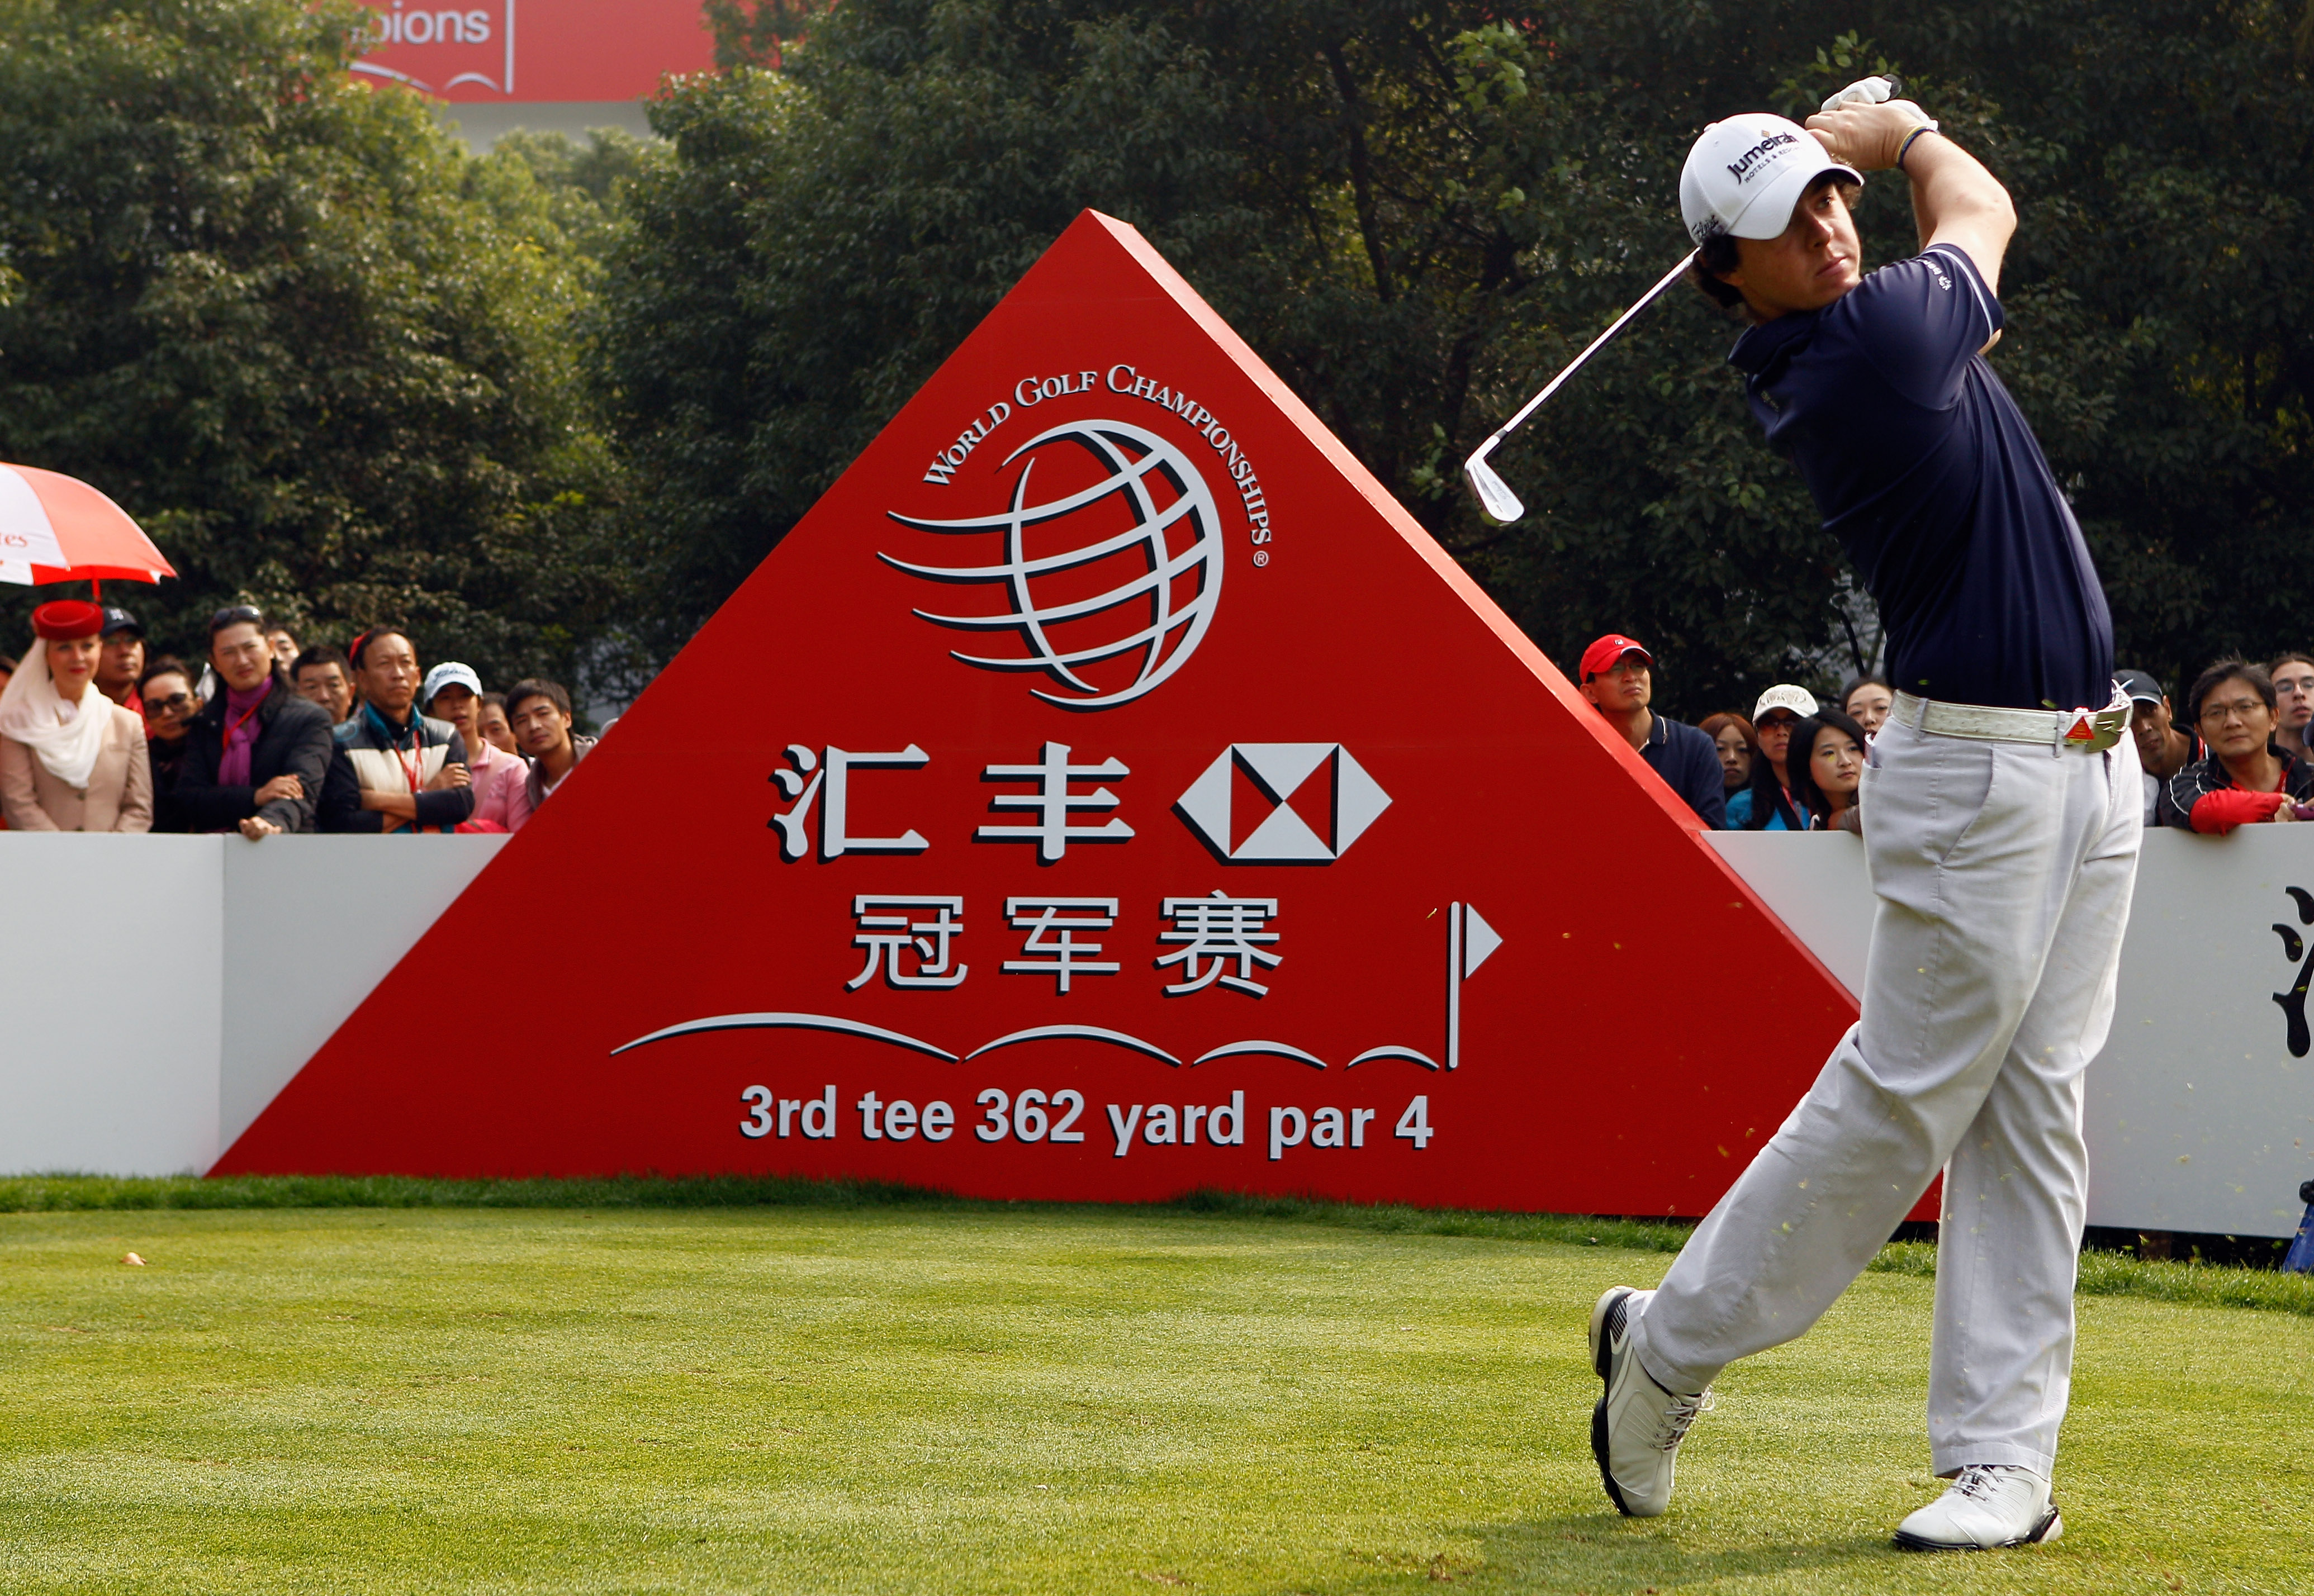 SHANGHAI, CHINA - NOVEMBER 07:  Rory McIlroy of Northern Ireland hits his tee shot on the third hole during the final round of the WGC-HSBC Champions at the Sheshan Golf Club on November 7, 2010 in Shanghai, China.  (Photo by Scott Halleran/Getty Images)